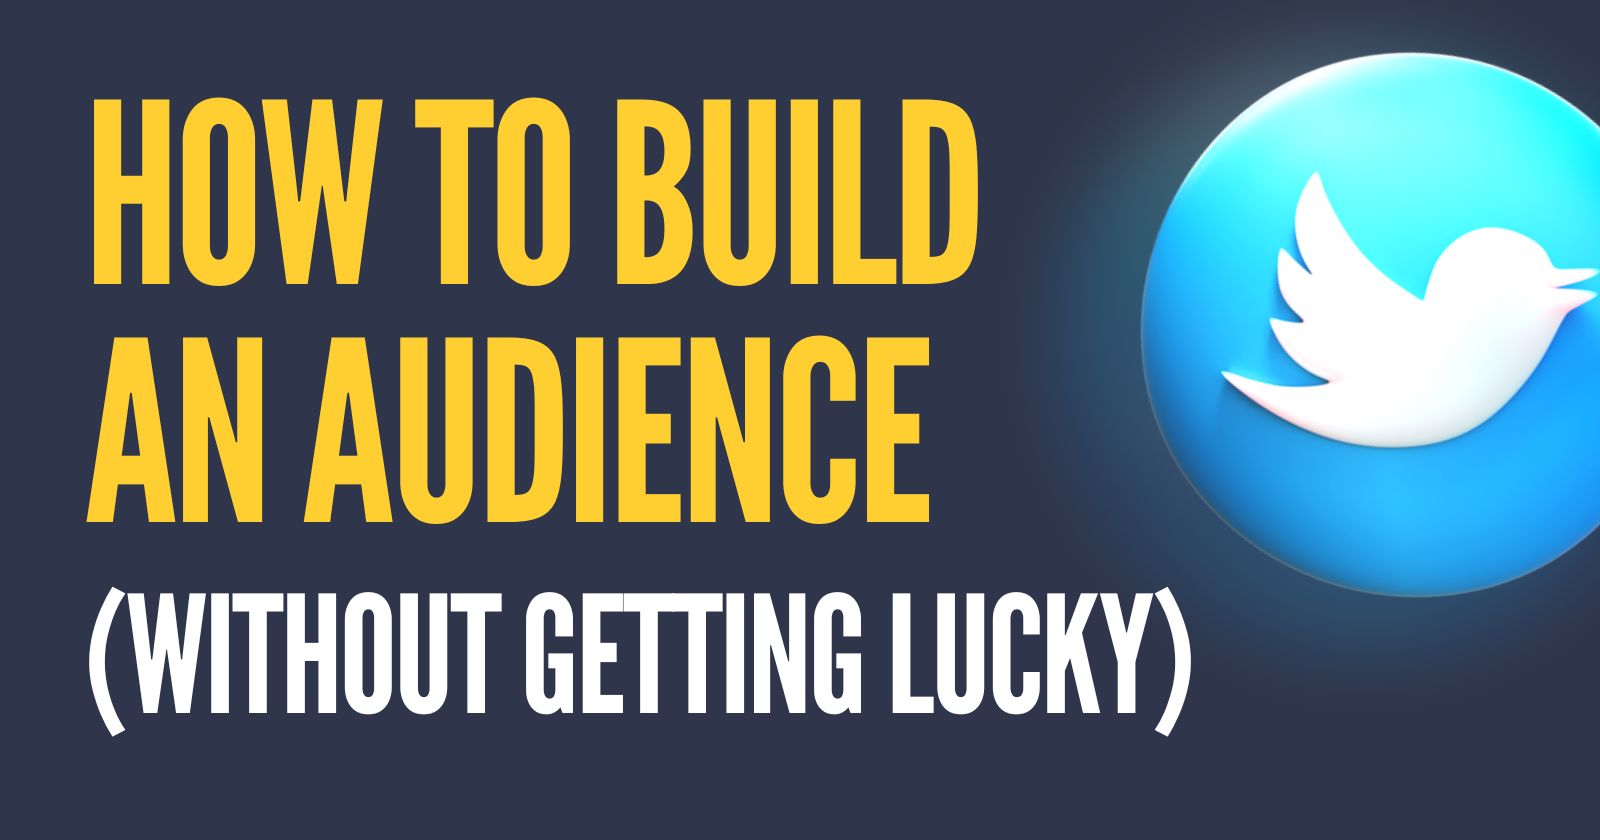 How to build an audience on Twitter (without getting lucky)